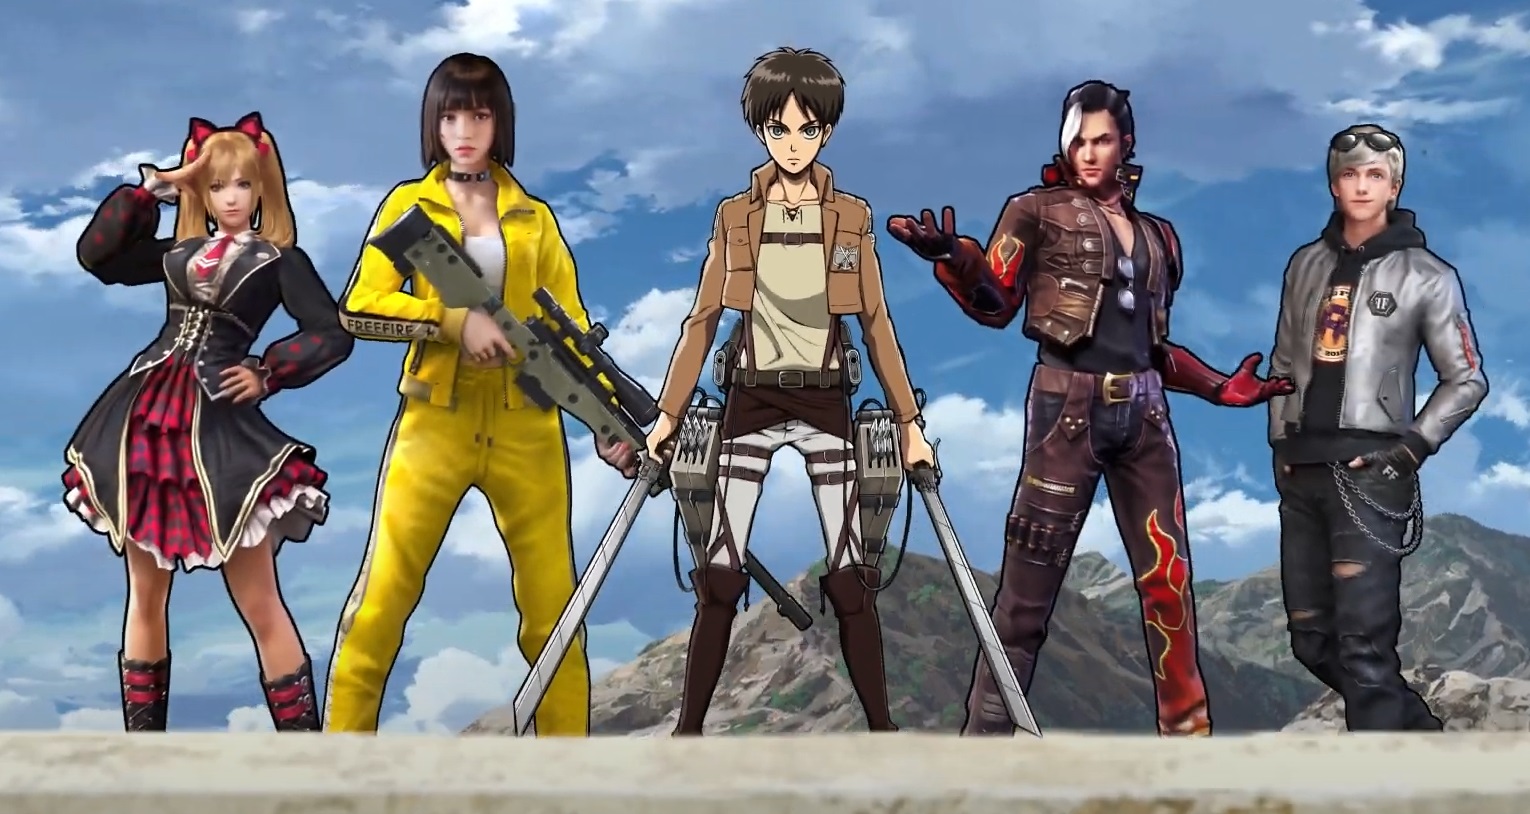 Free Fire’s Attack on Titan Event Will Let You Take on Titans in a